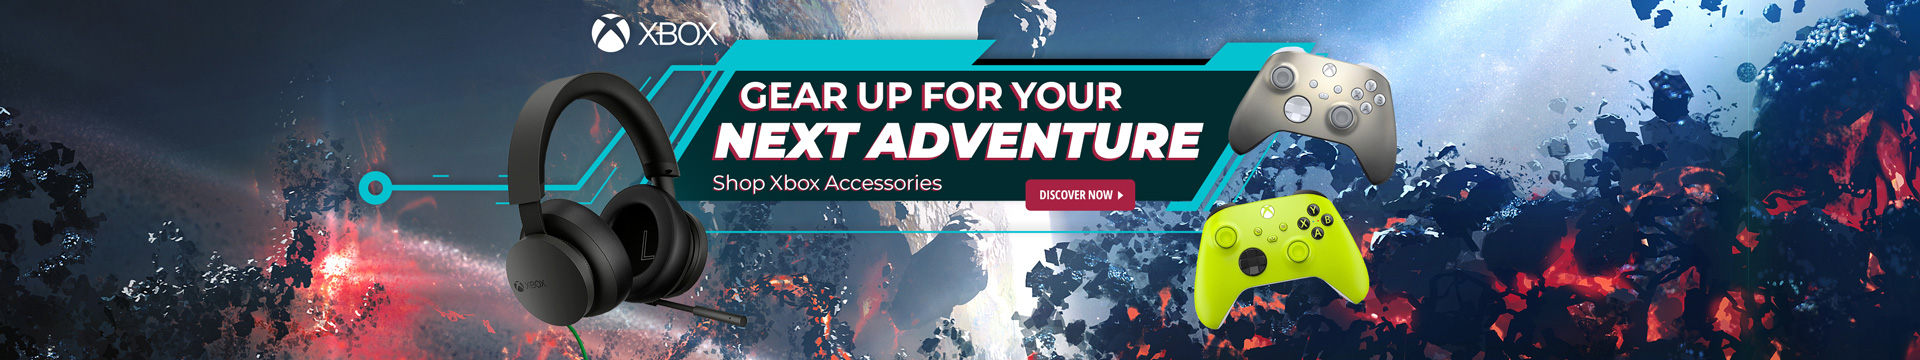 Gear up for your next adventure